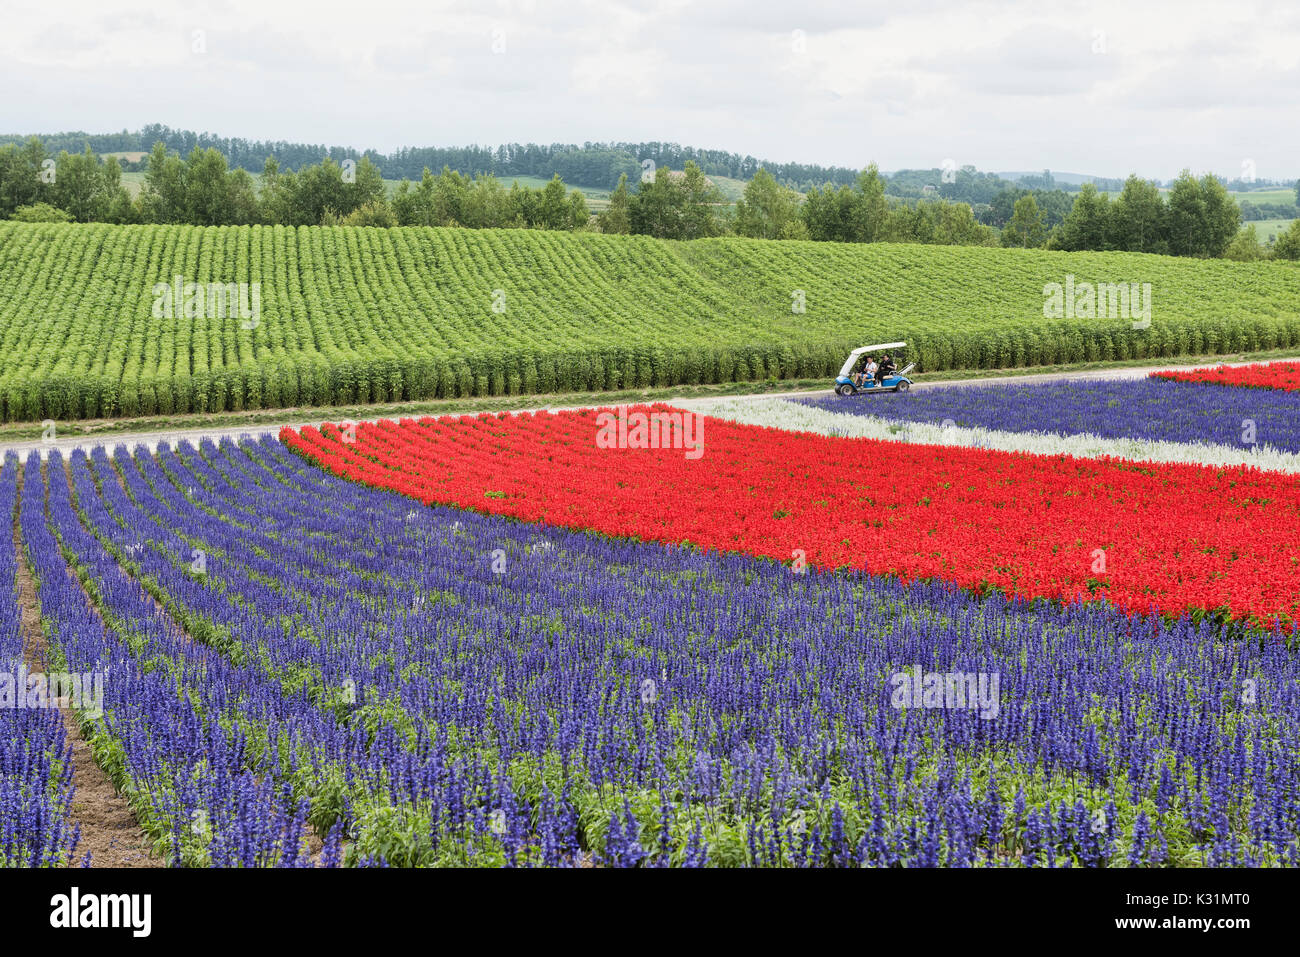 Colorful fields of scarlet sage and Lamiaceae at the flower fields of Shikisai no Oka, Hokkaido, Japan Stock Photo